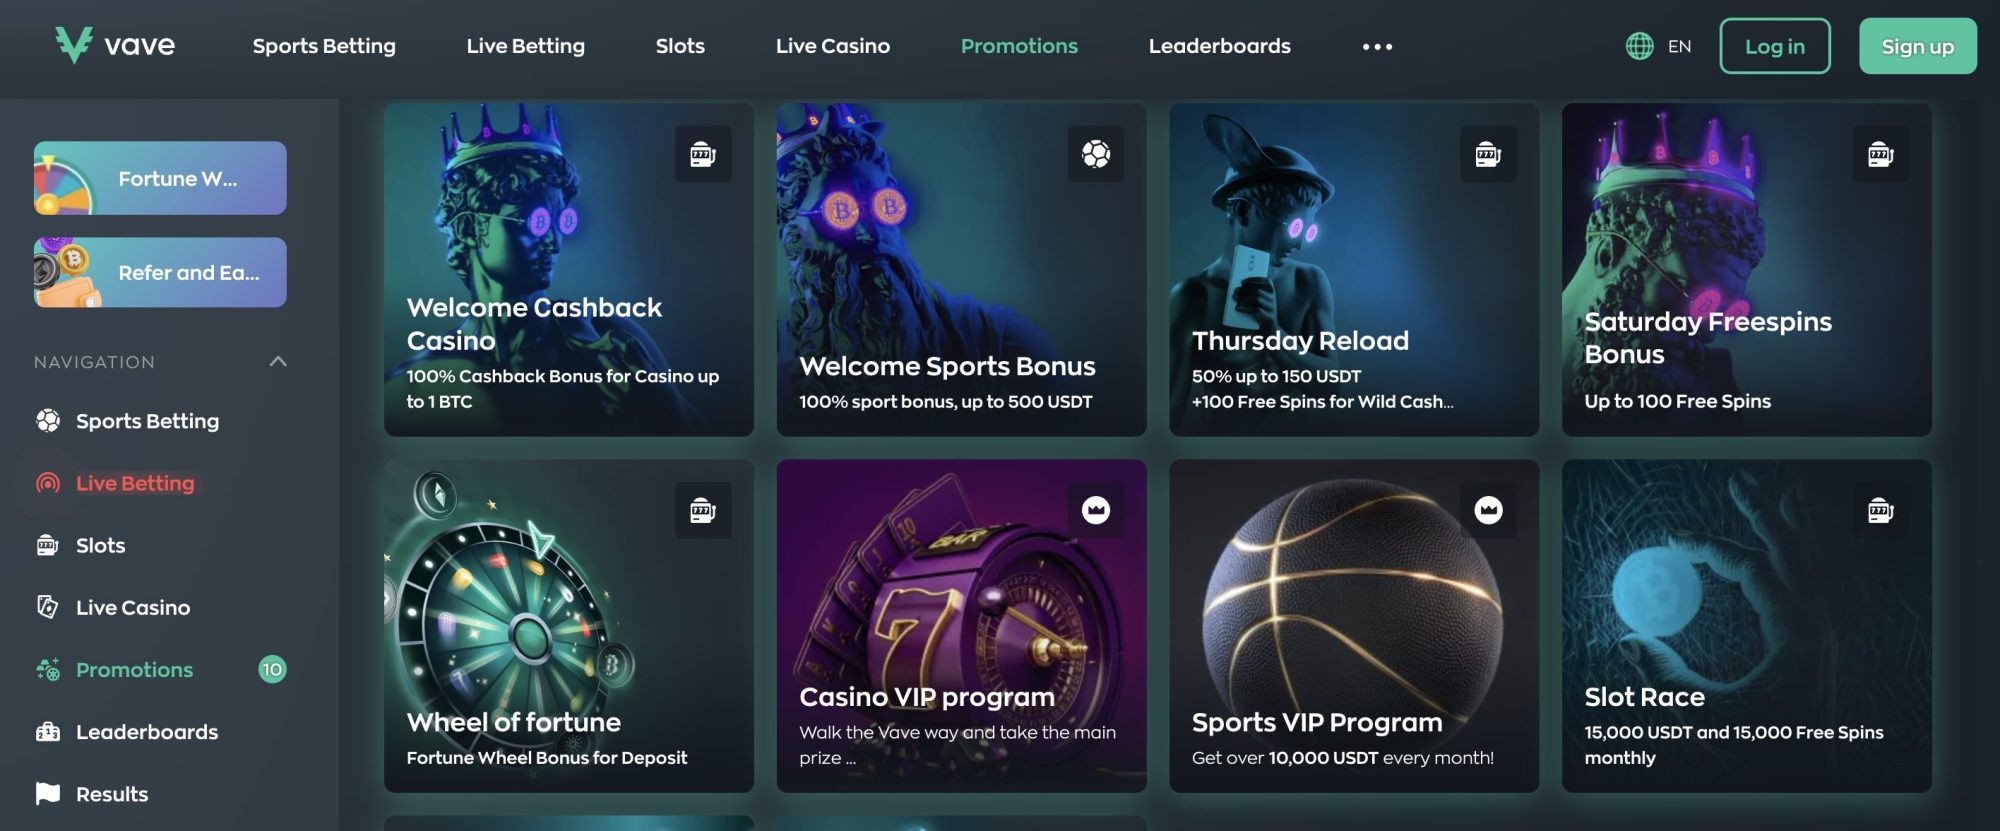 Vave casino and sportsbook review 